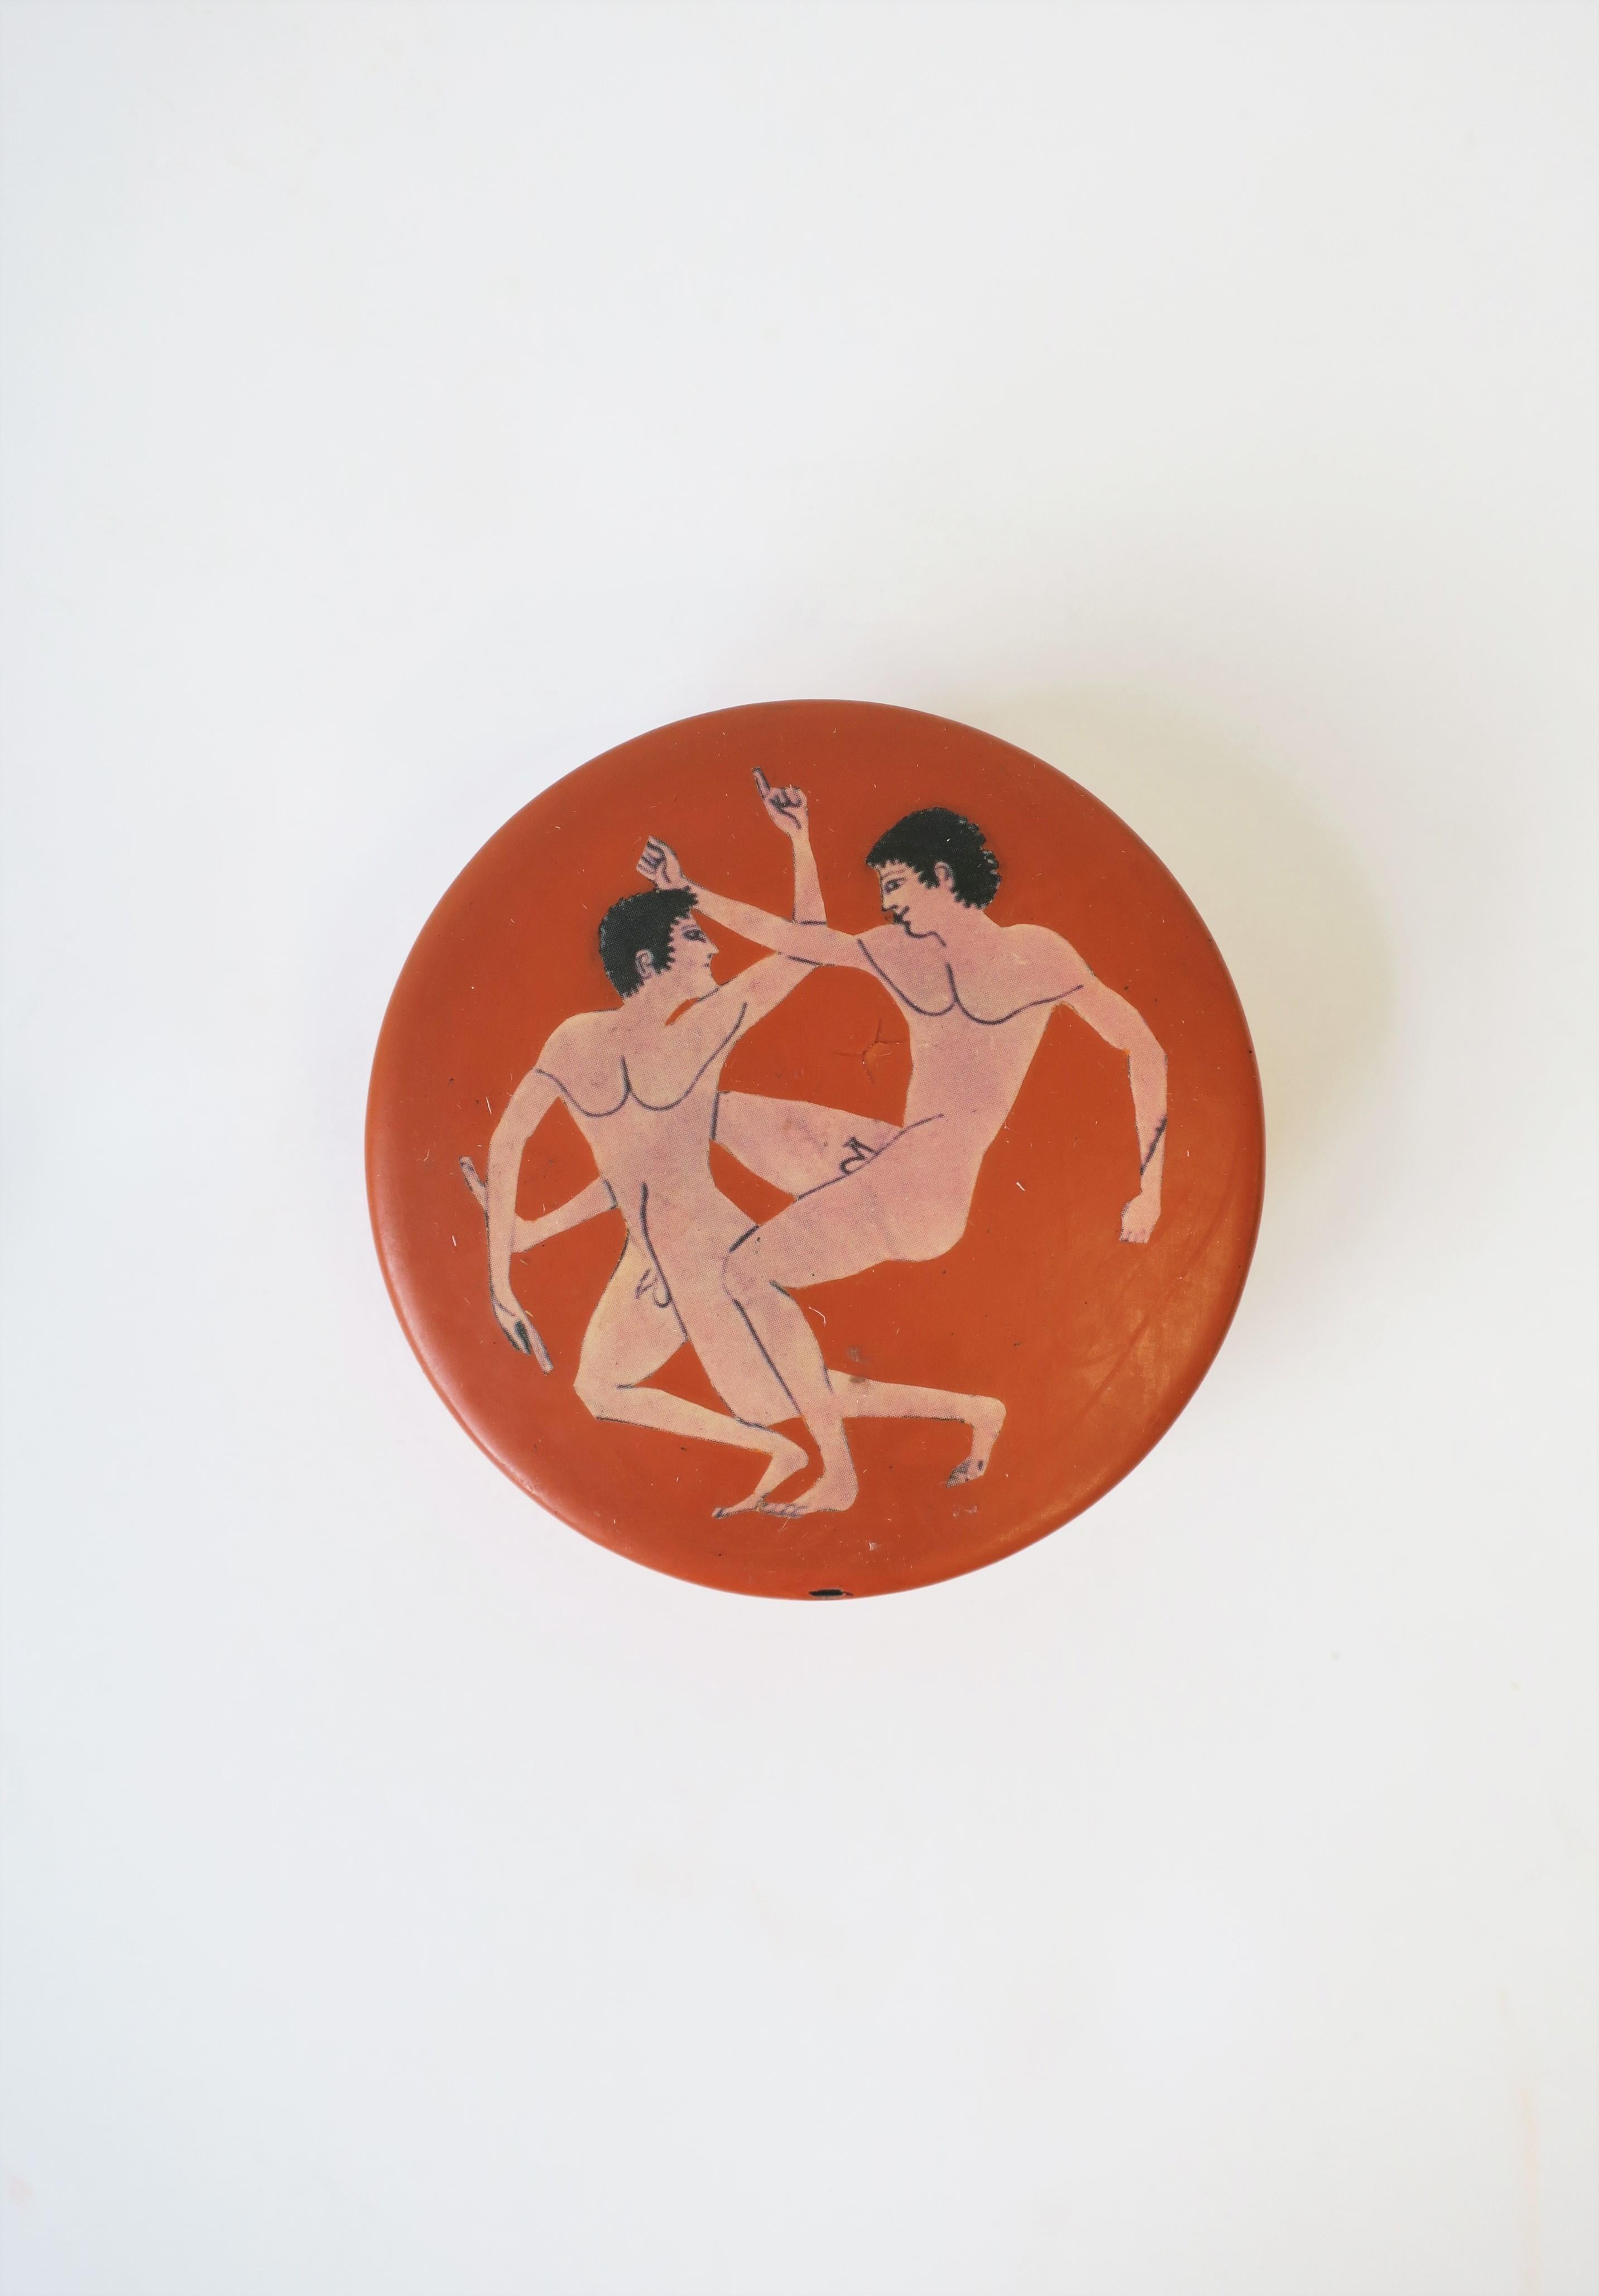 A round box, decorative or jewelry, with Greco-Roman nude male figurative design, circa 20th century. Boxes exterior has an orange/terracotta hue with two nude male figures on top/lid. Interior is a high-gloss black lacquer. Box is great to hold